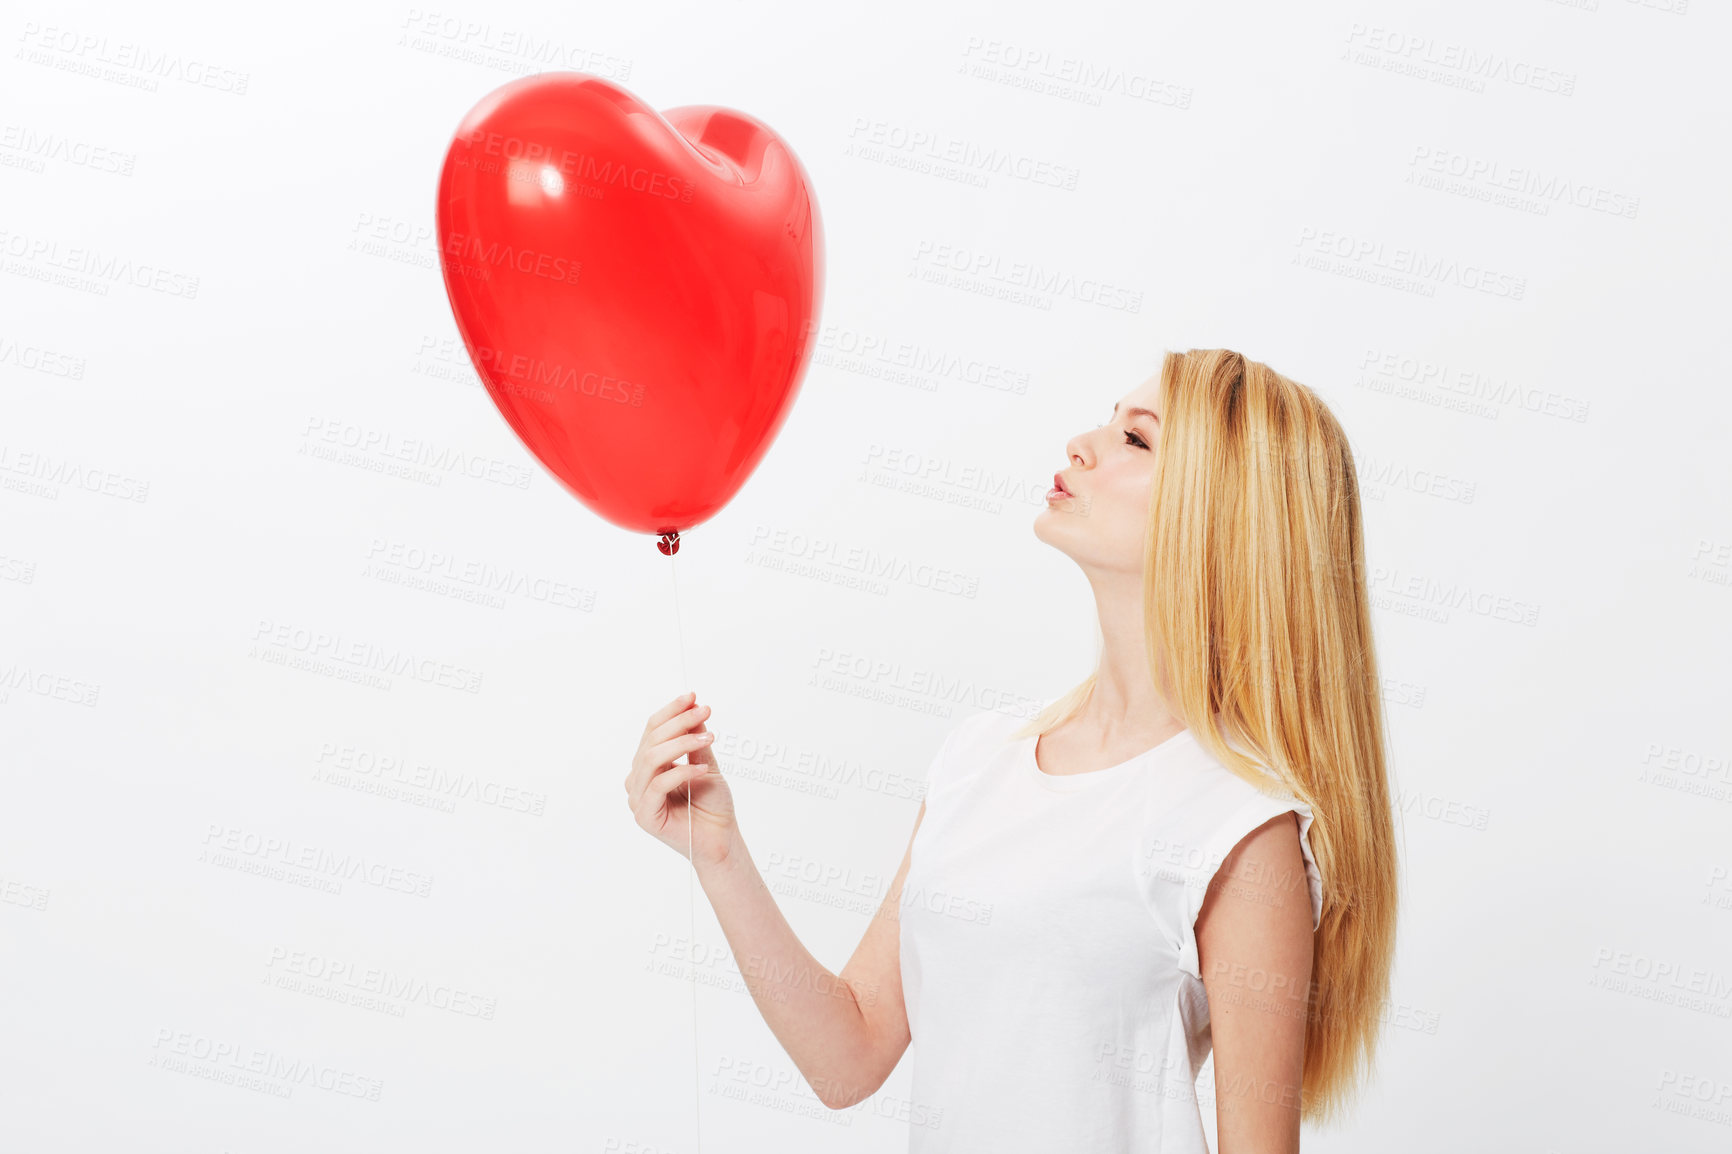 Buy stock photo Studio, heart and balloon with a profile of woman on valentines day isolated on white background. Love, red shape and female person holding a gift or present with romance, emotion or passion for fun